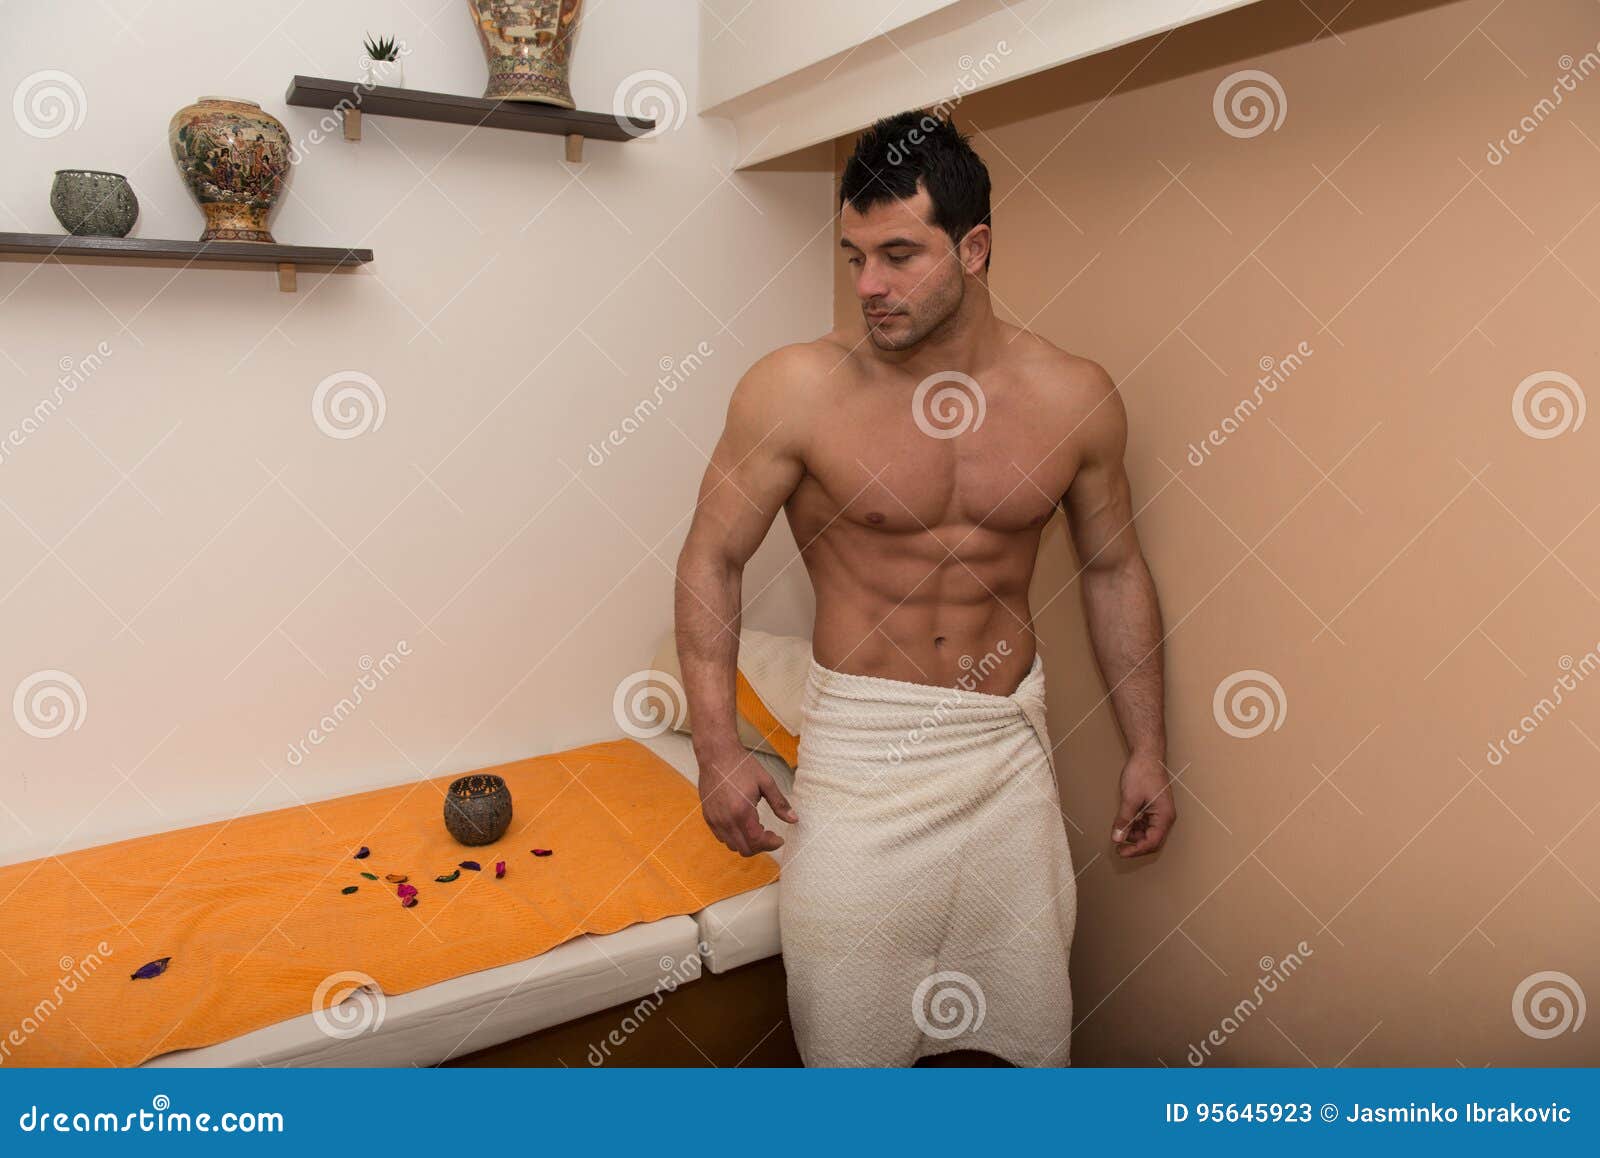 Portrait Of A Fit Man In Massage Room Stock Image Image Of Looking